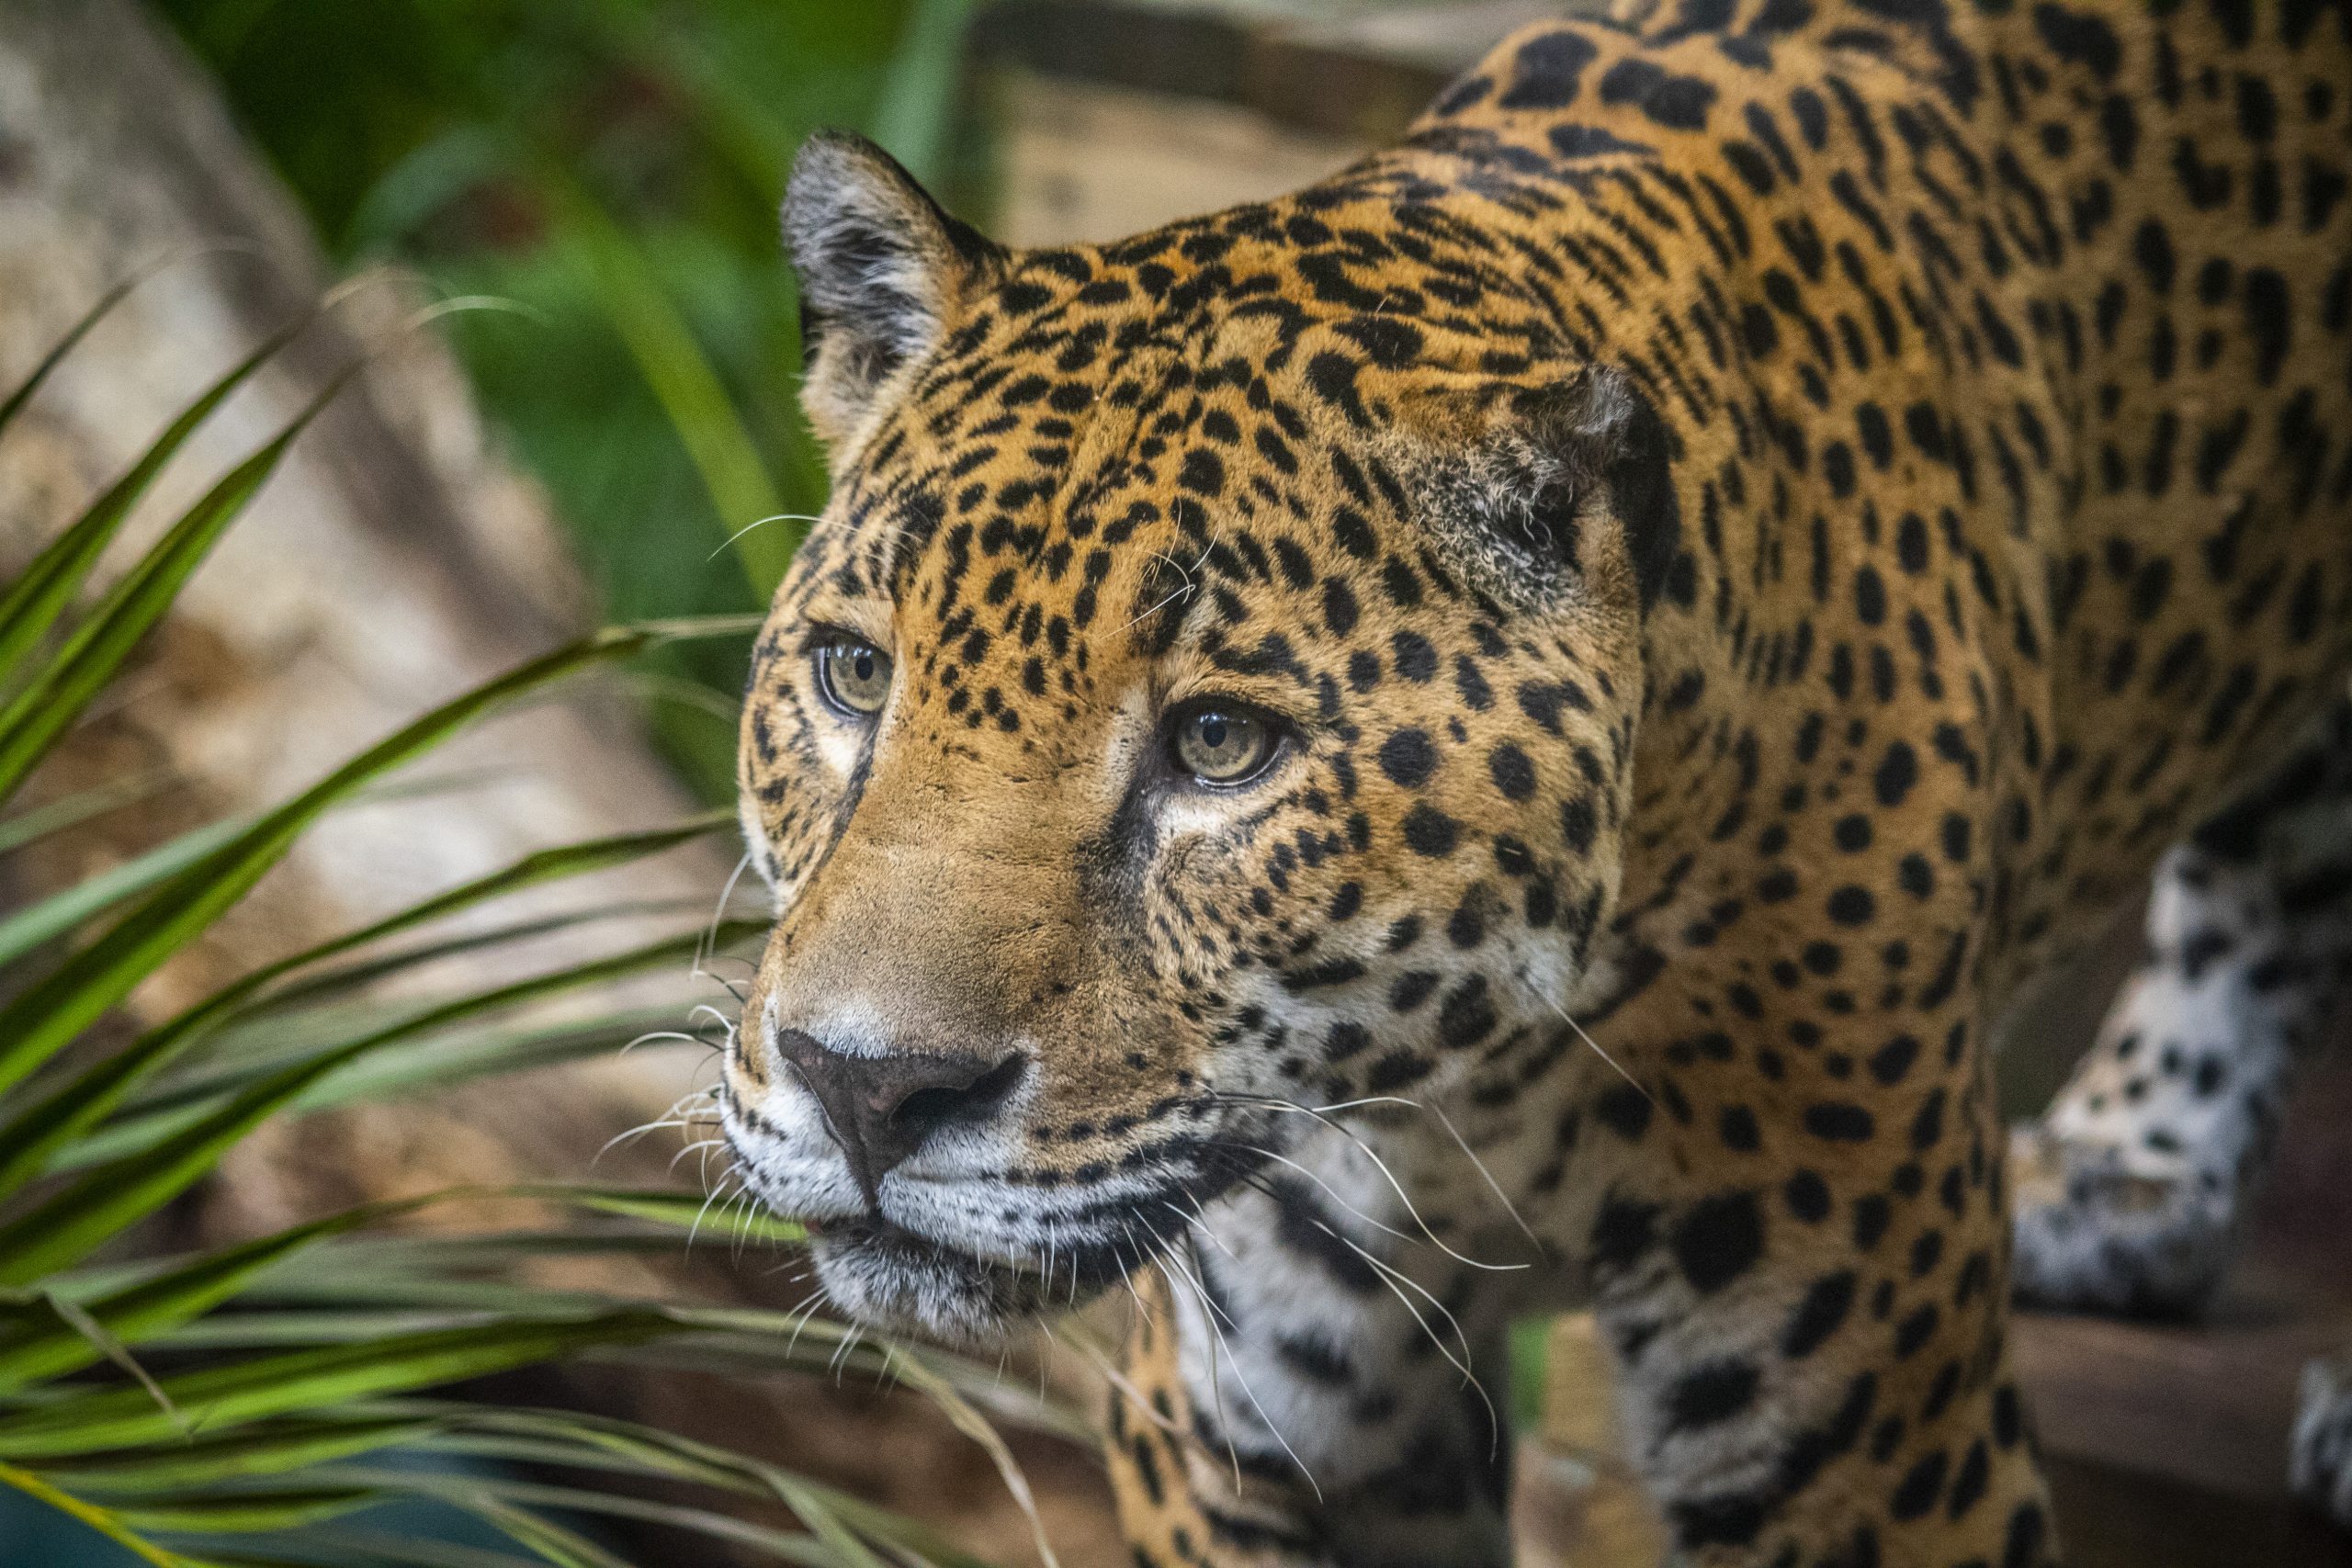 Welcome Our First New Rainforest Revealed Resident - Brevard Zoo Blog